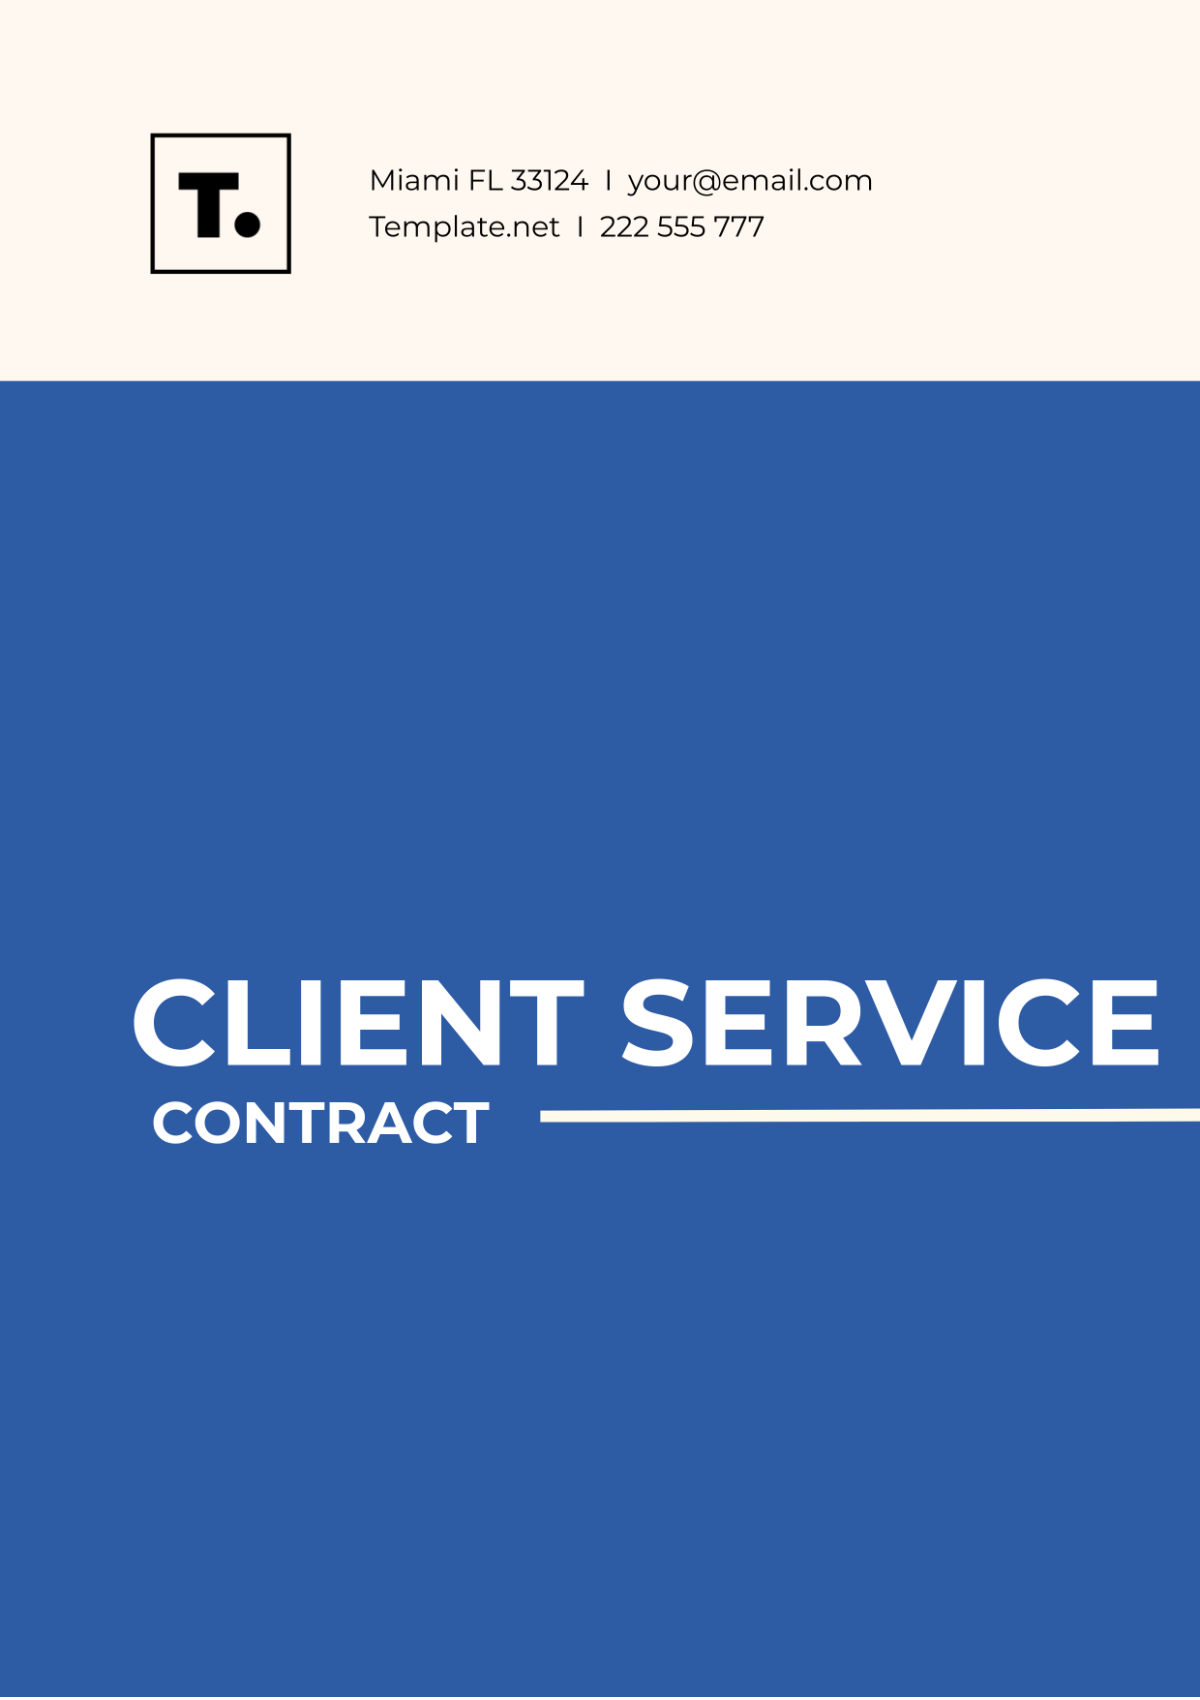 Client Service Contract Template